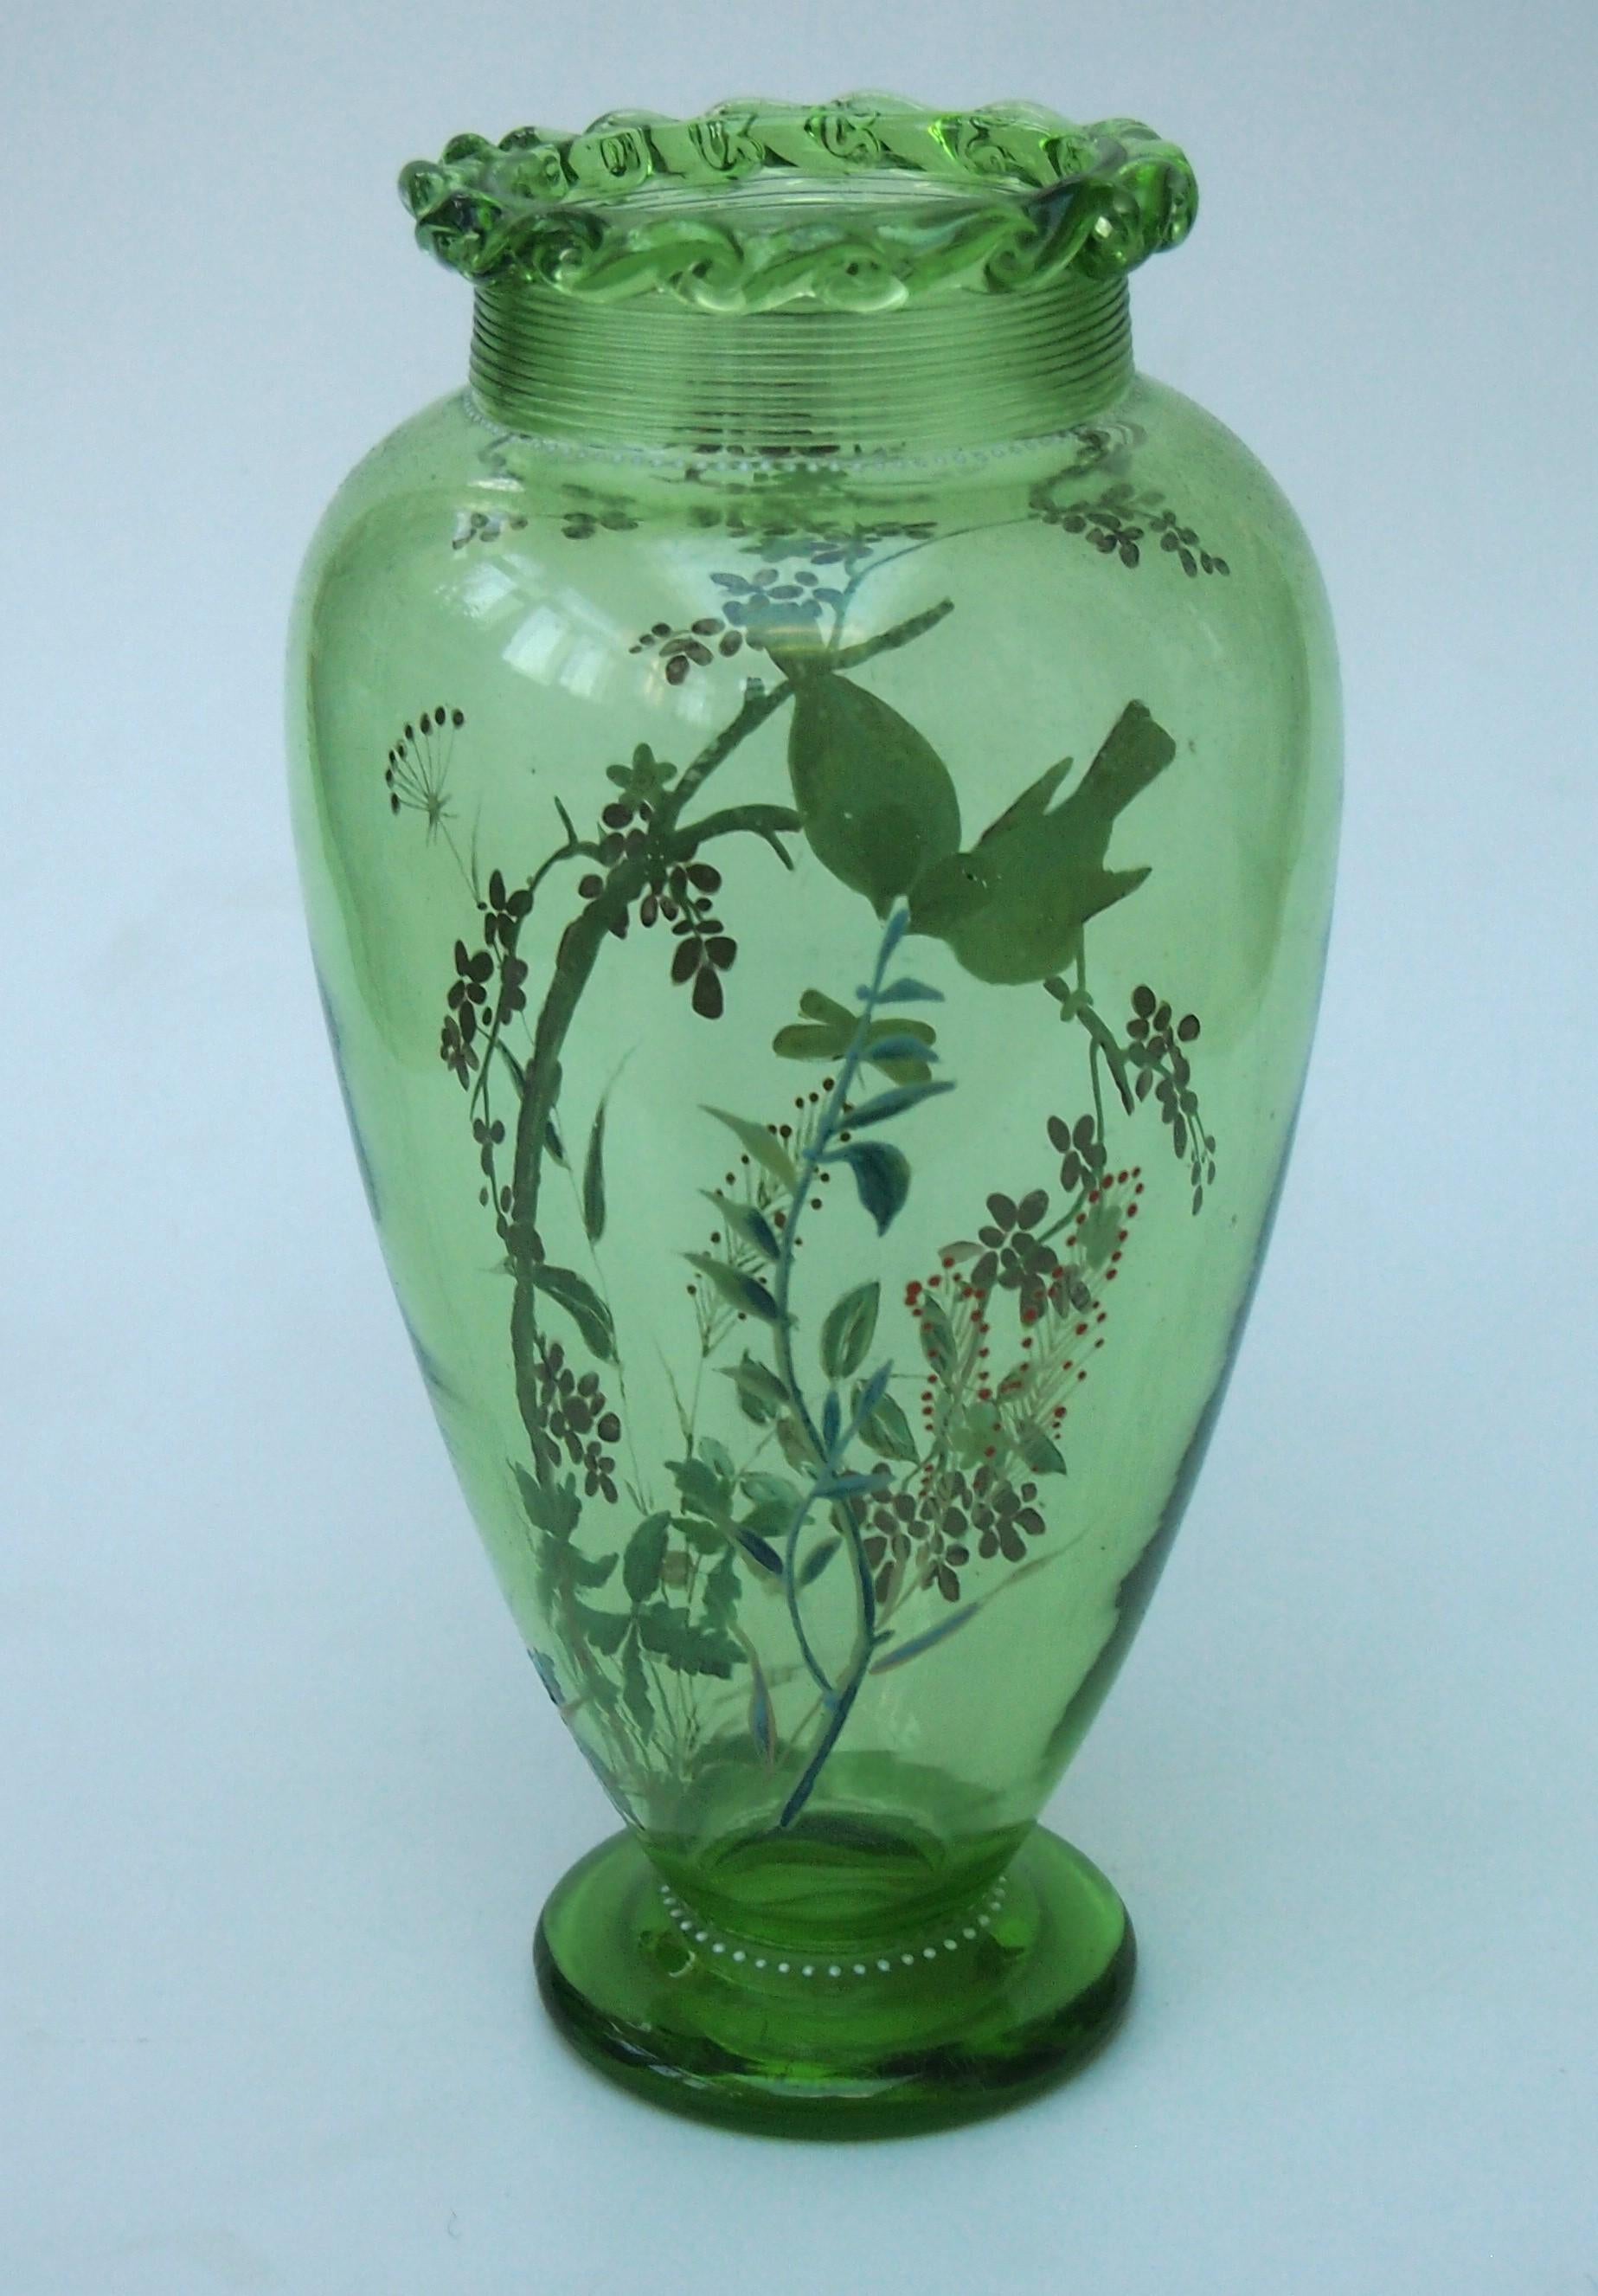 Art Nouveau Harrach Glass Vase Decorated with Birds in Branches  c1890 For Sale